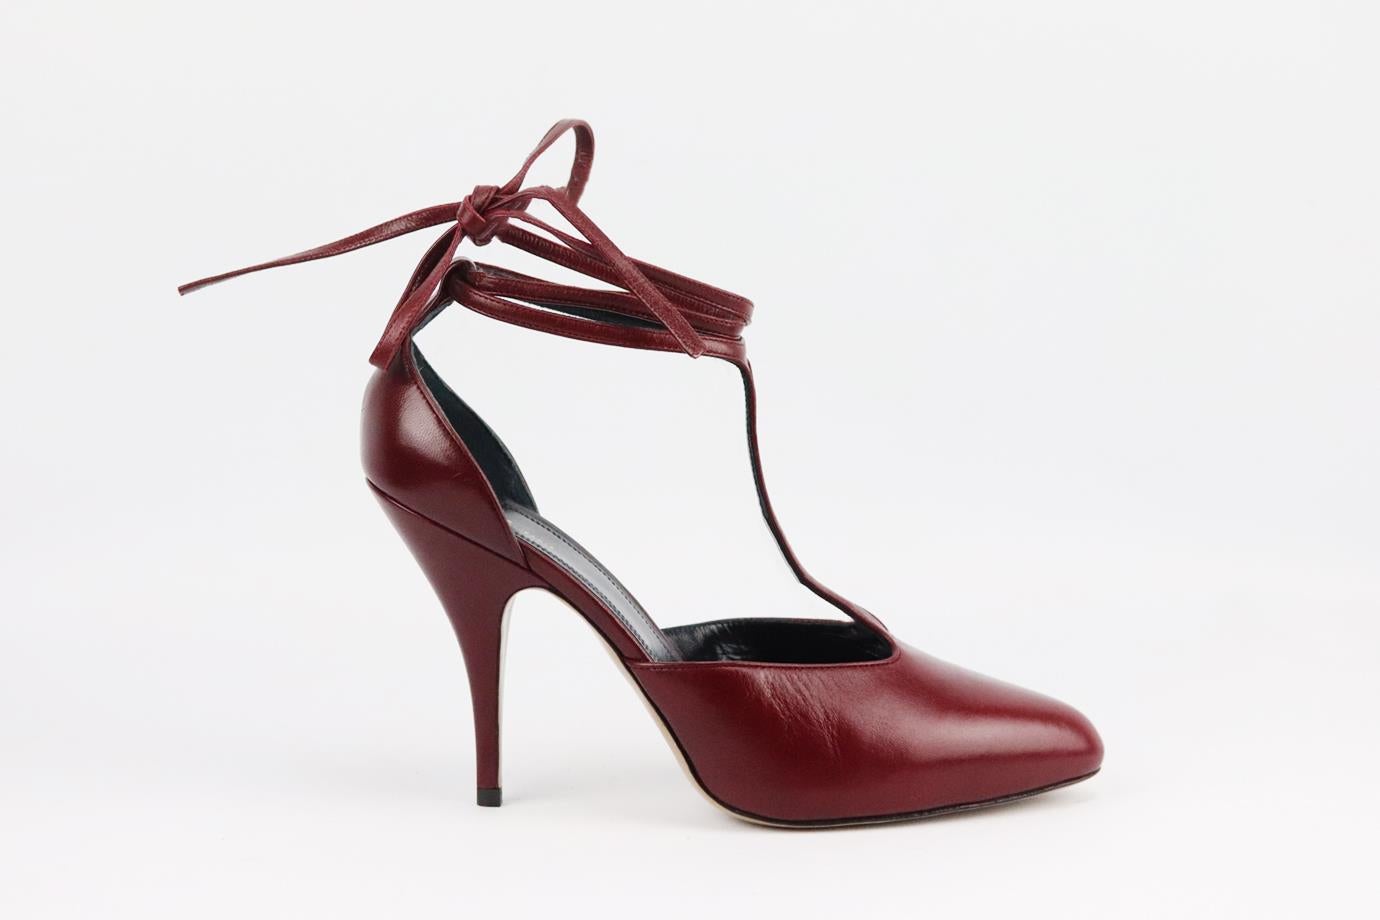 Celine lace up leather pumps. Burgundy. Lace up fastening at front. Does not come with box or dustbag. Size: EU 39 (UK 6, US 9). Insole: 10 in. Heel: 3.5 in
